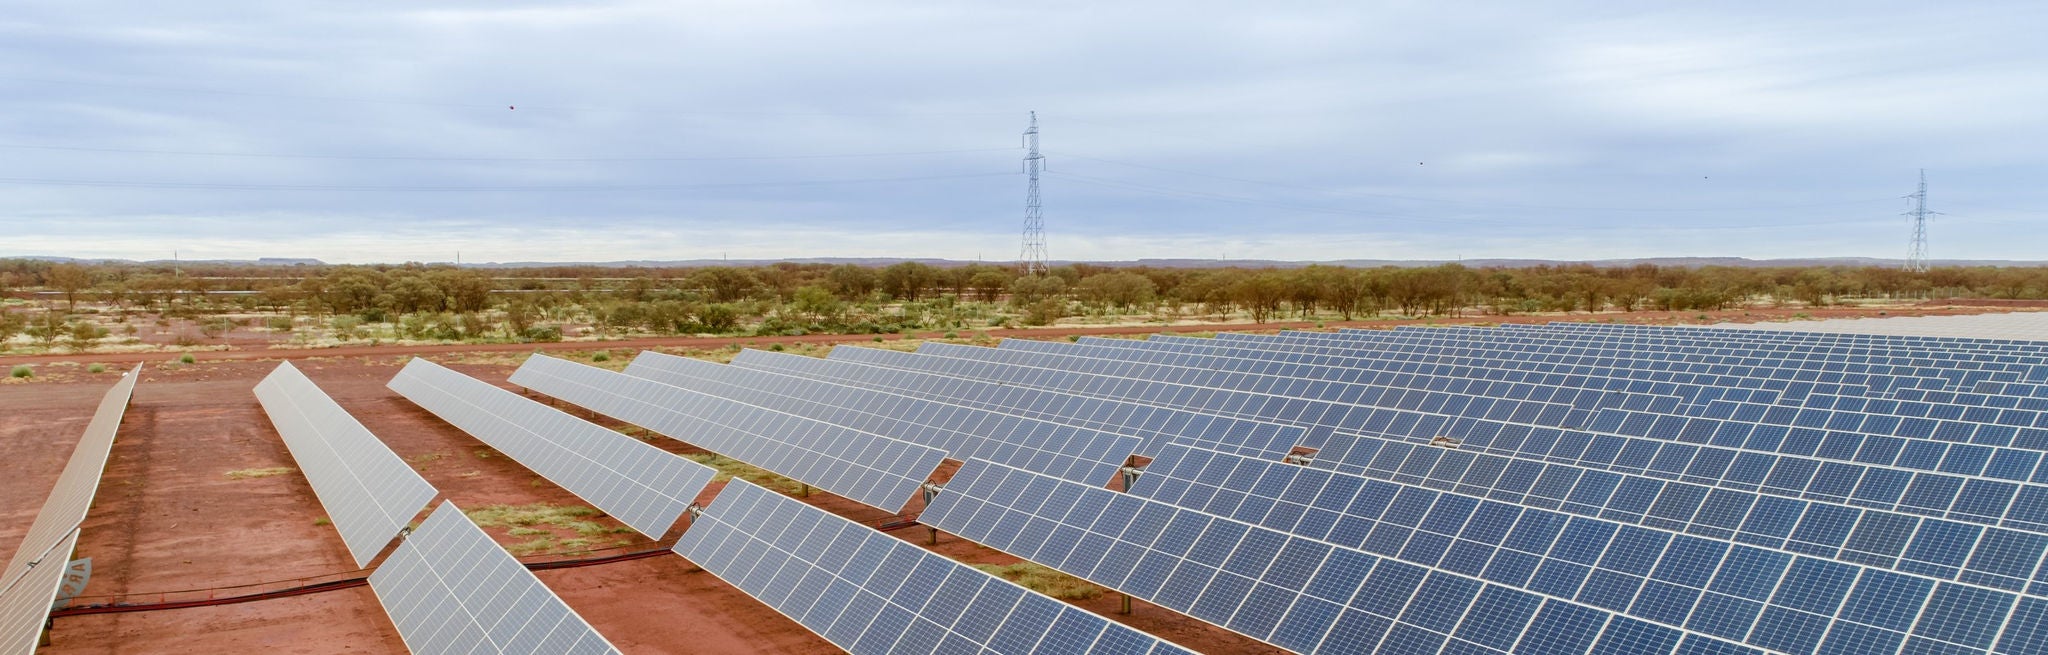 Alinta Energy and Fortescue switch on Western Australia’s largest remote solar farm